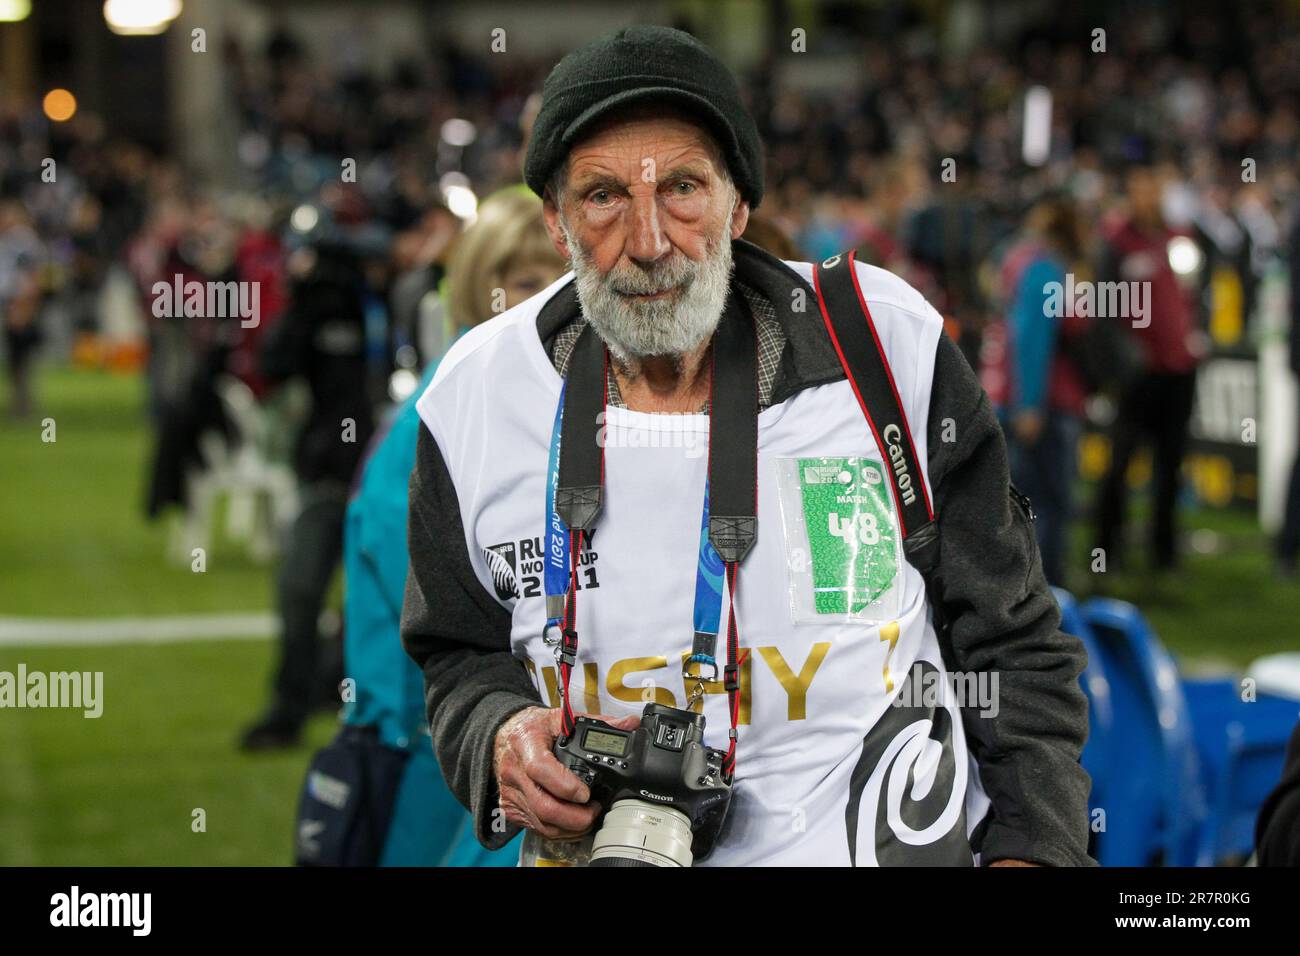 New Zealand rugby photographer Peter Bush awaits the start of New Zealand versus France Rugby World Cup final at Eden Park, Auckland, New Zealand, Sunday, October 23, 2011. Stock Photo